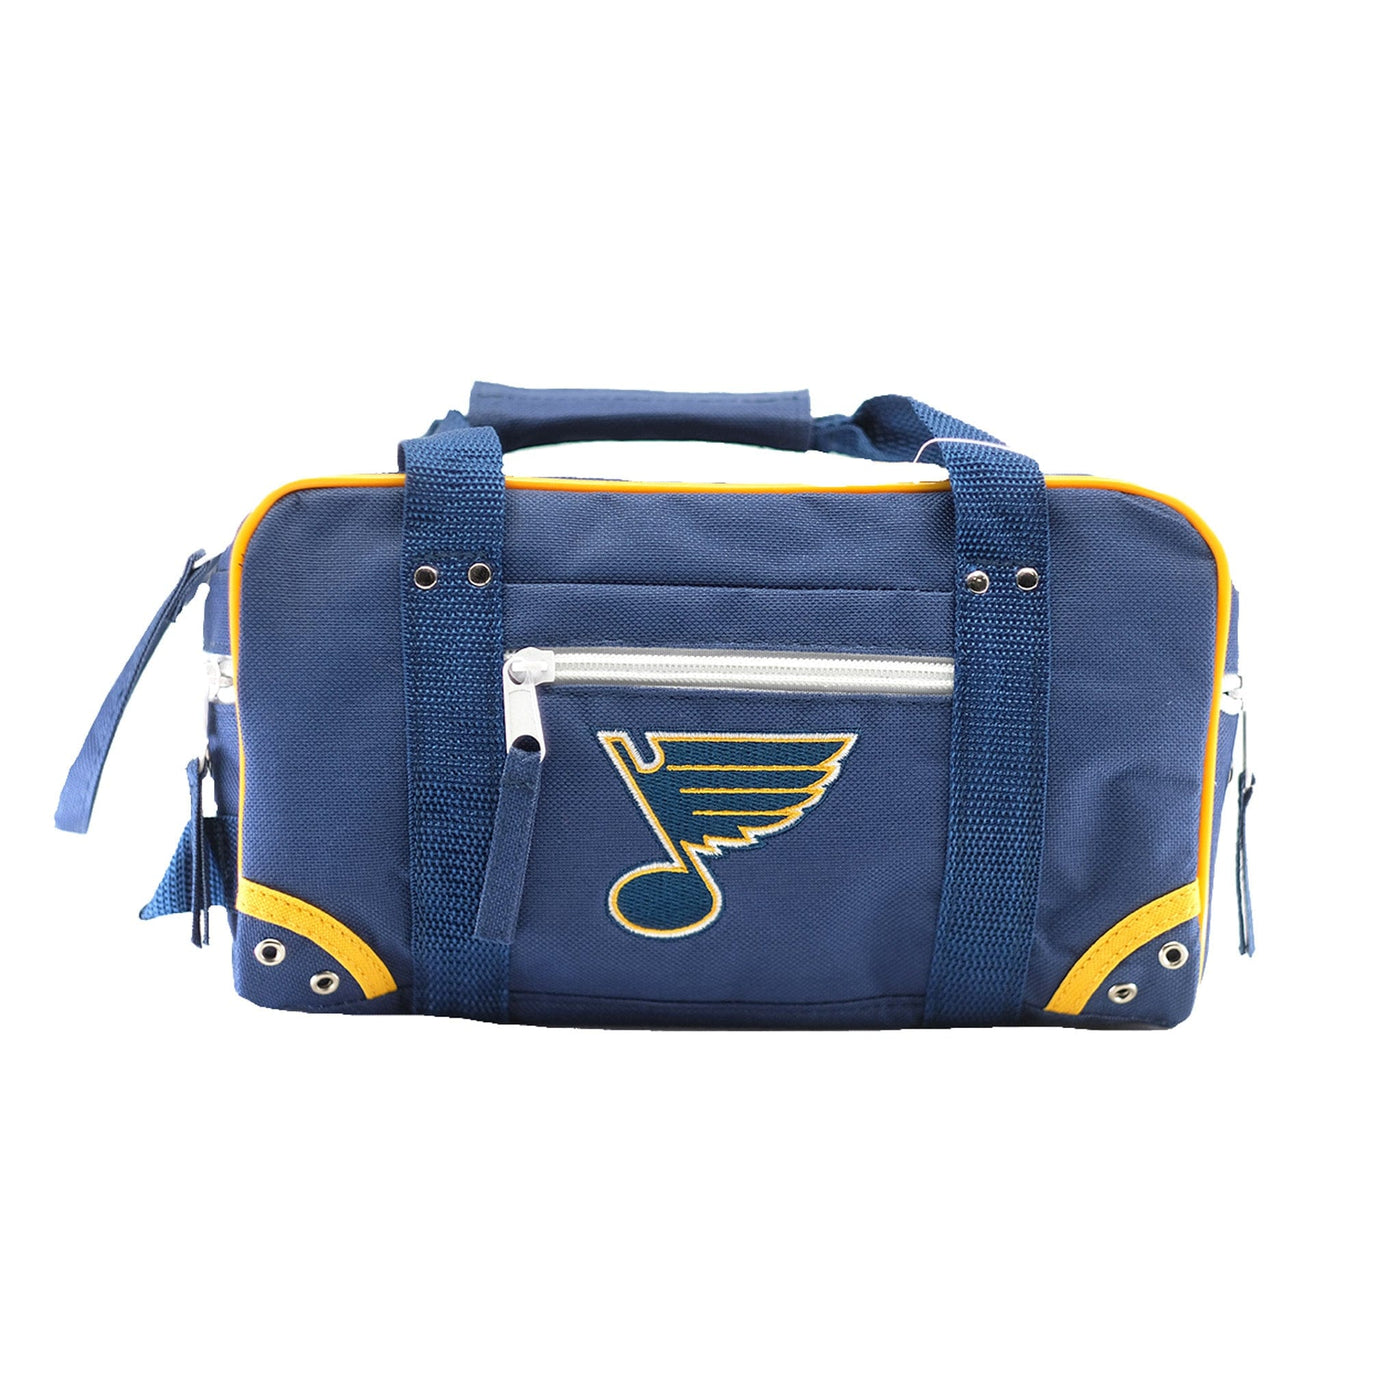 St. Louis Blues Ultimate Sports Kit NHL Toiletry Bag - The Hockey Shop Source For Sports